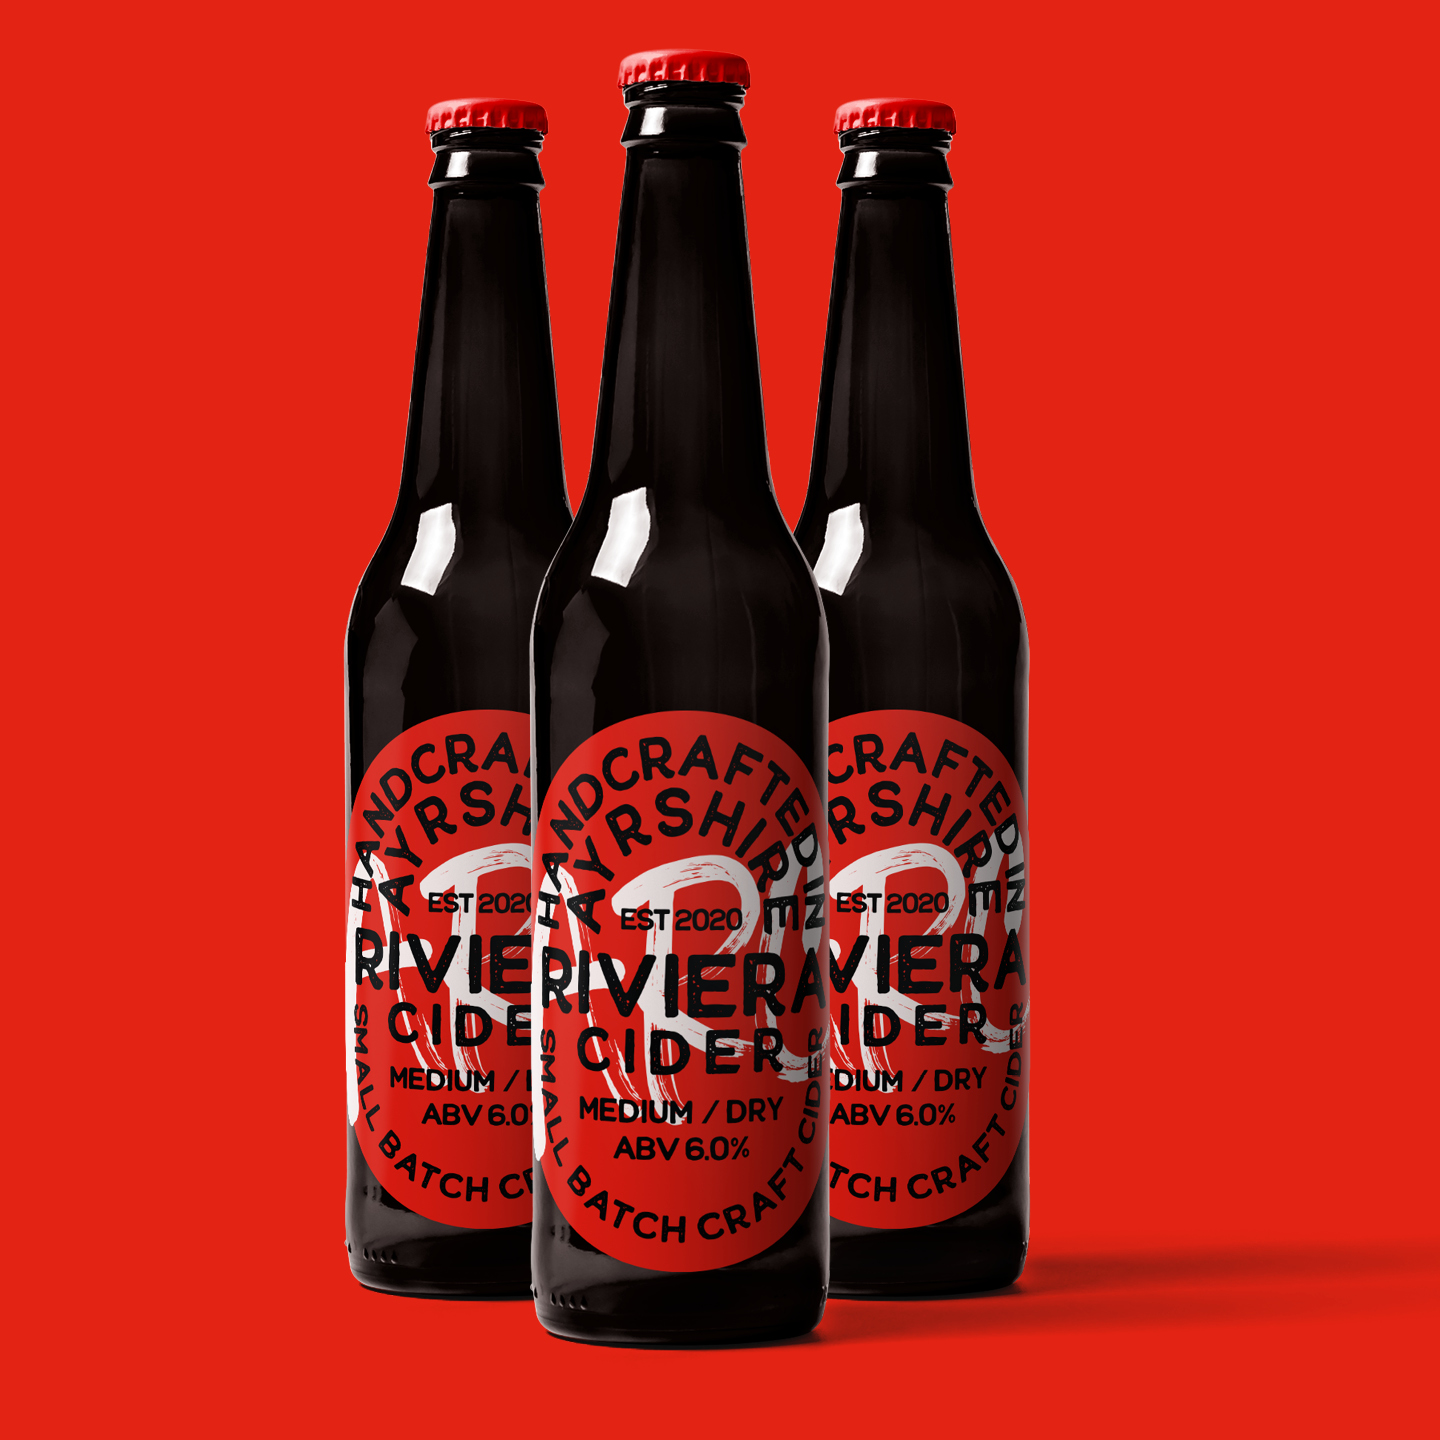 Ayrshire Riviera Cider Packaging Created by M.M.Design